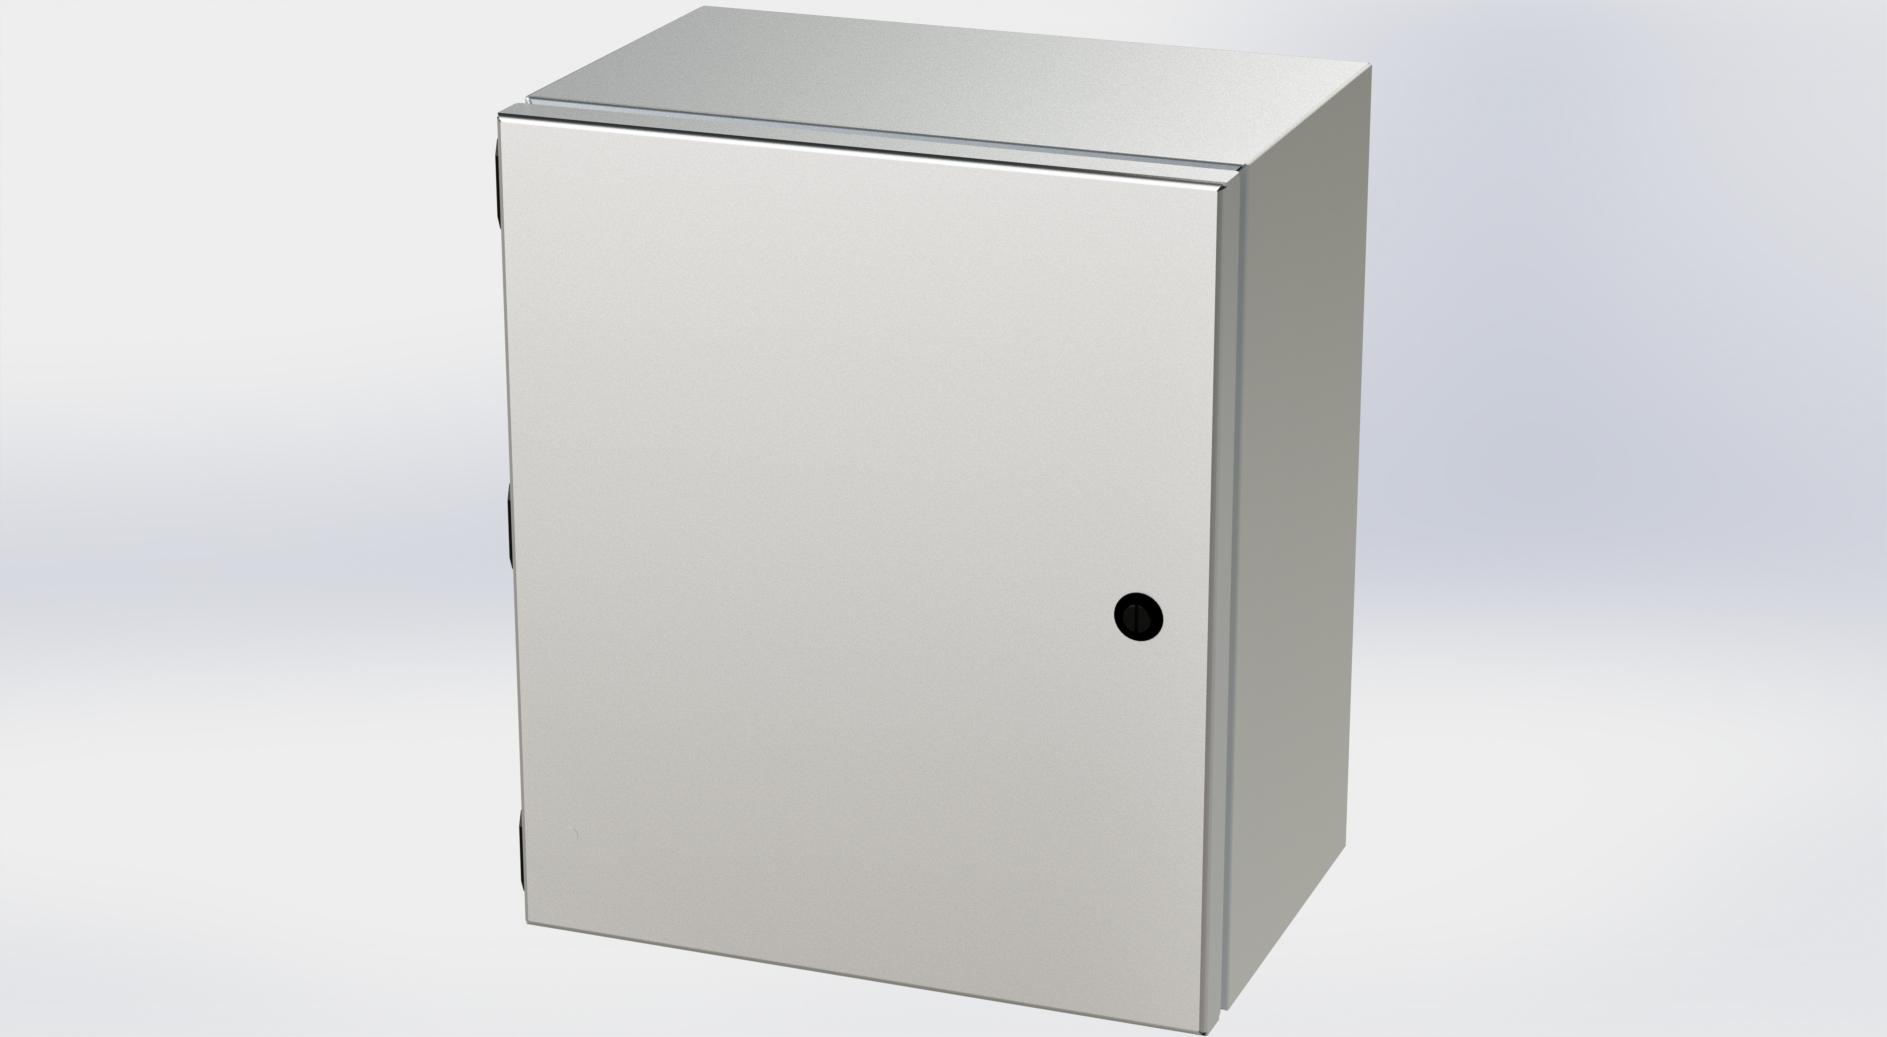 Saginaw Control SCE-14128ELJSS S.S. ELJ Enclosure, Height:14.00", Width:12.00", Depth:8.00", #4 brushed finish on all exterior surfaces. Optional sub-panels are powder coated white.